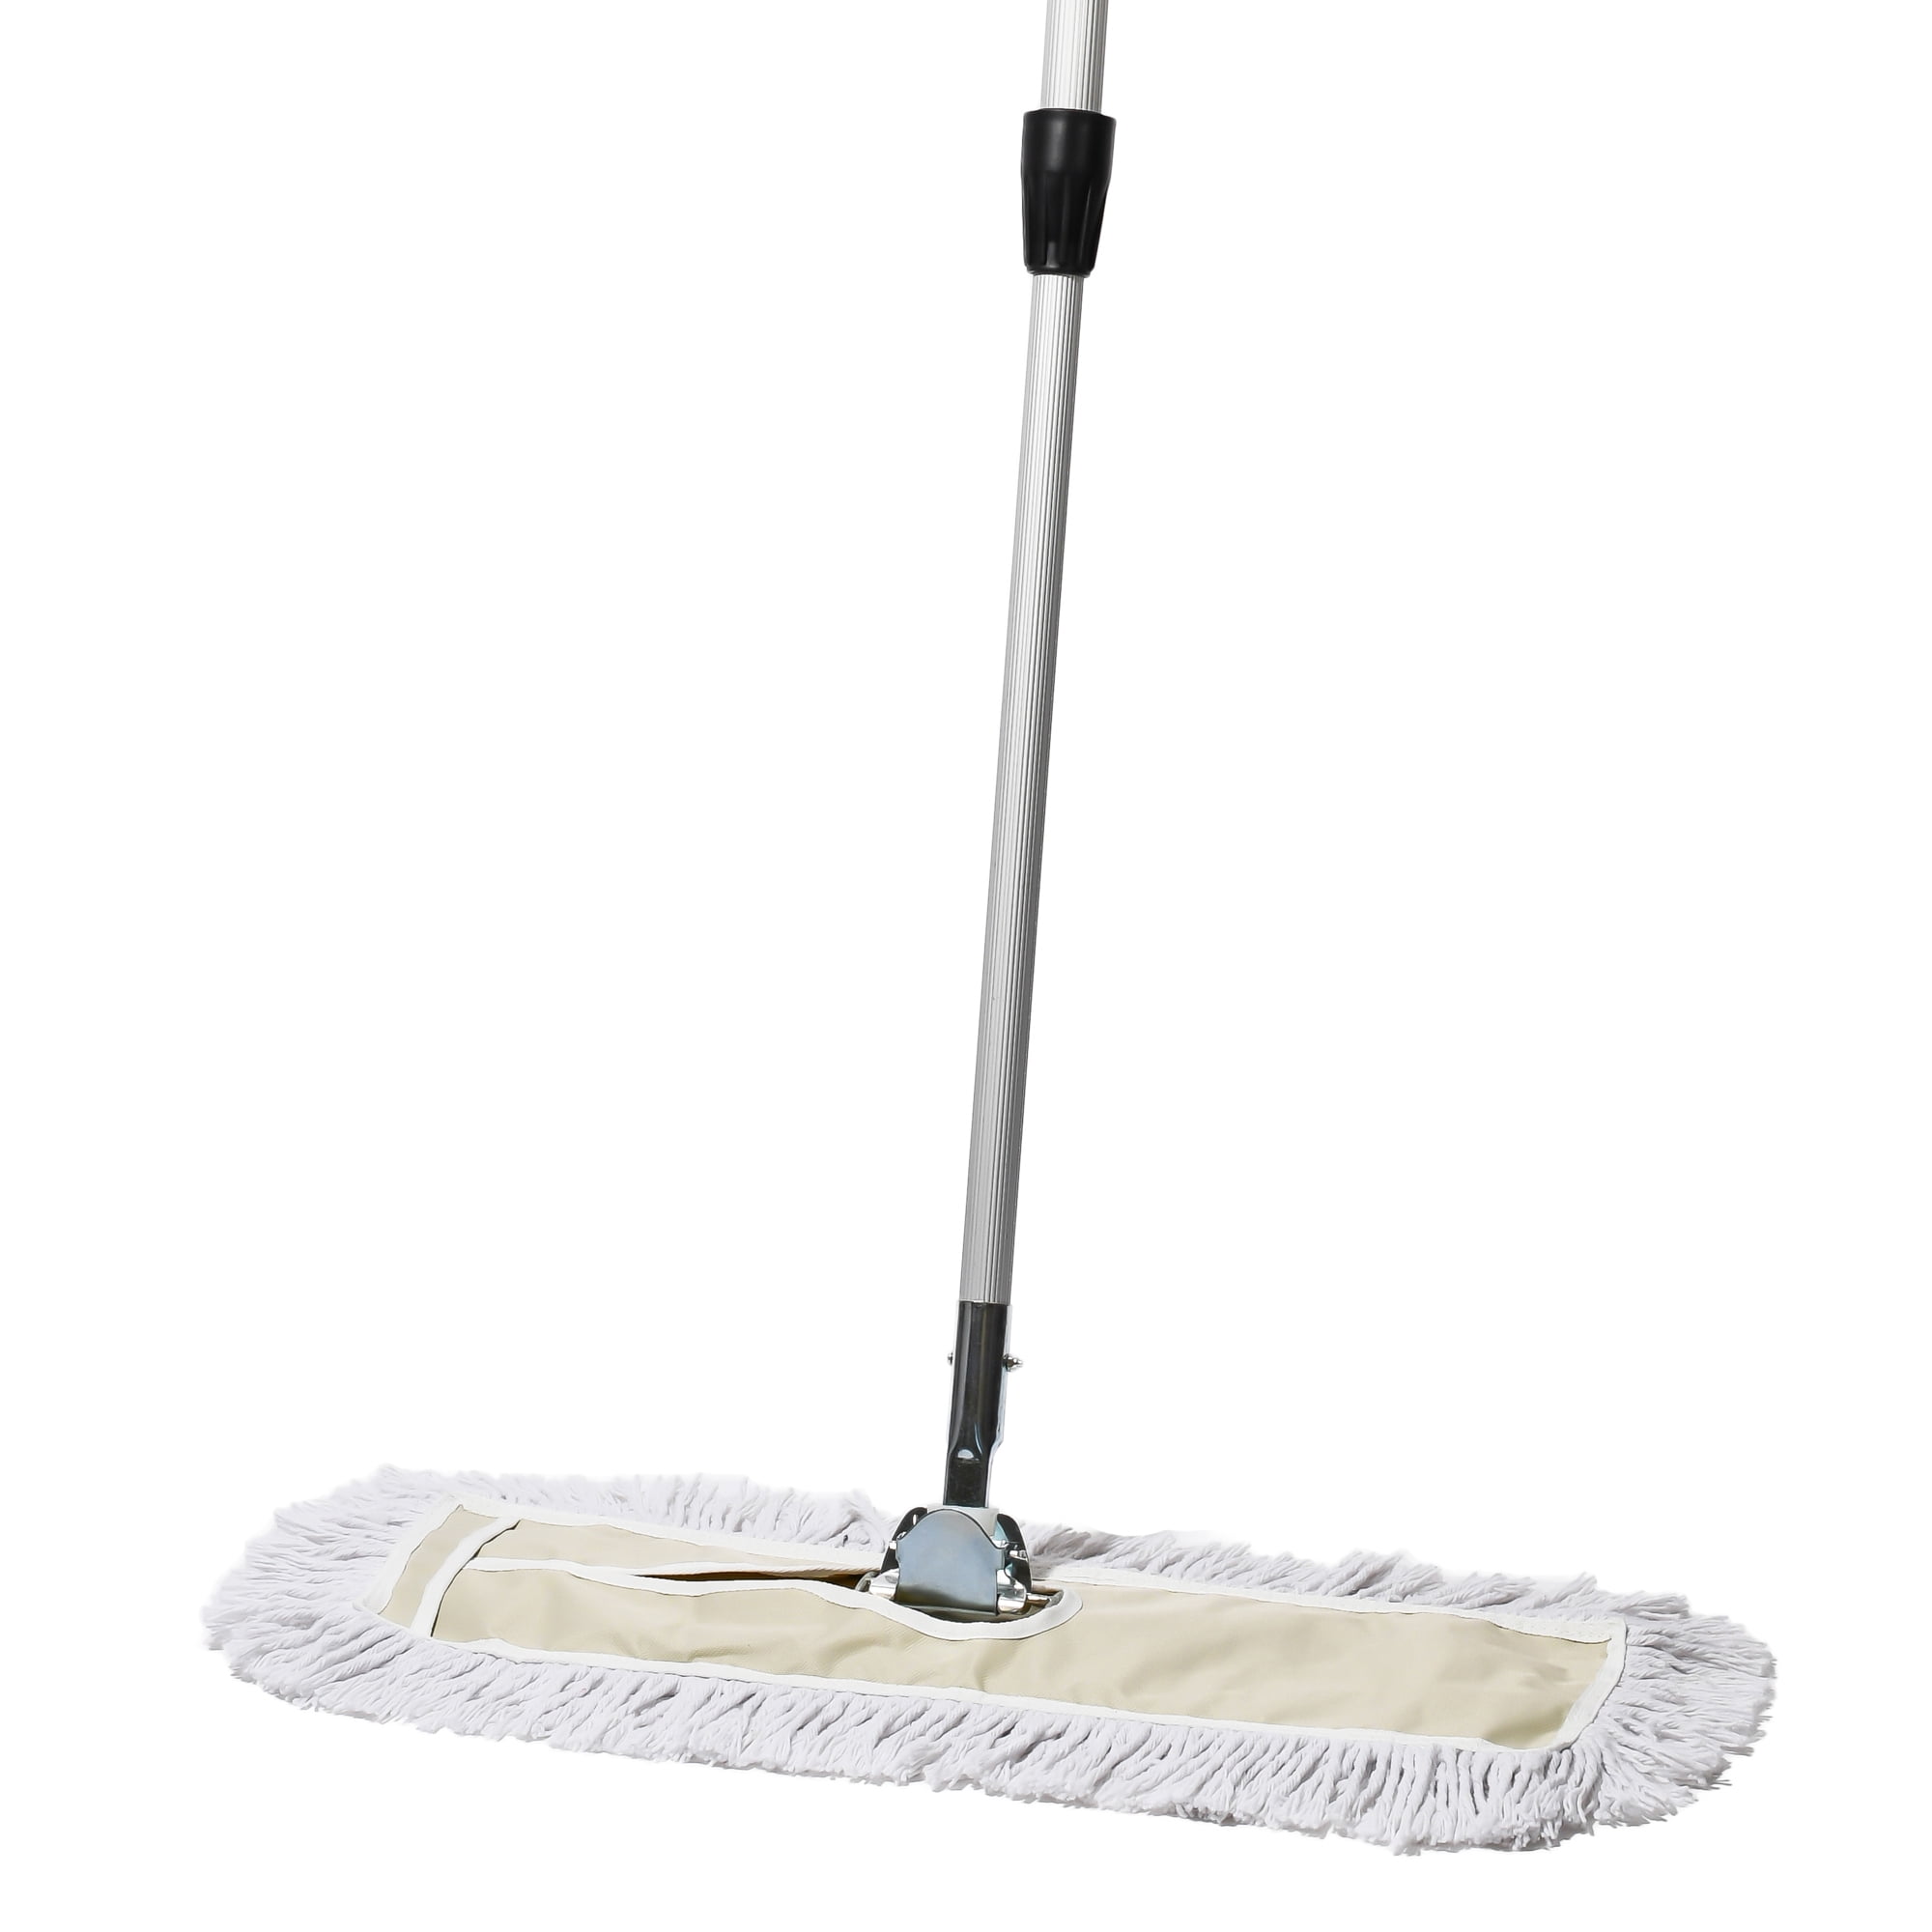 24 X 5 Wide Mop Head with Cut Ends Tidy Tools 24 inch Industrial Strength Cotton Dust Mop with Metal Telescopic Handle and Frame Hardwood Floor Broom 